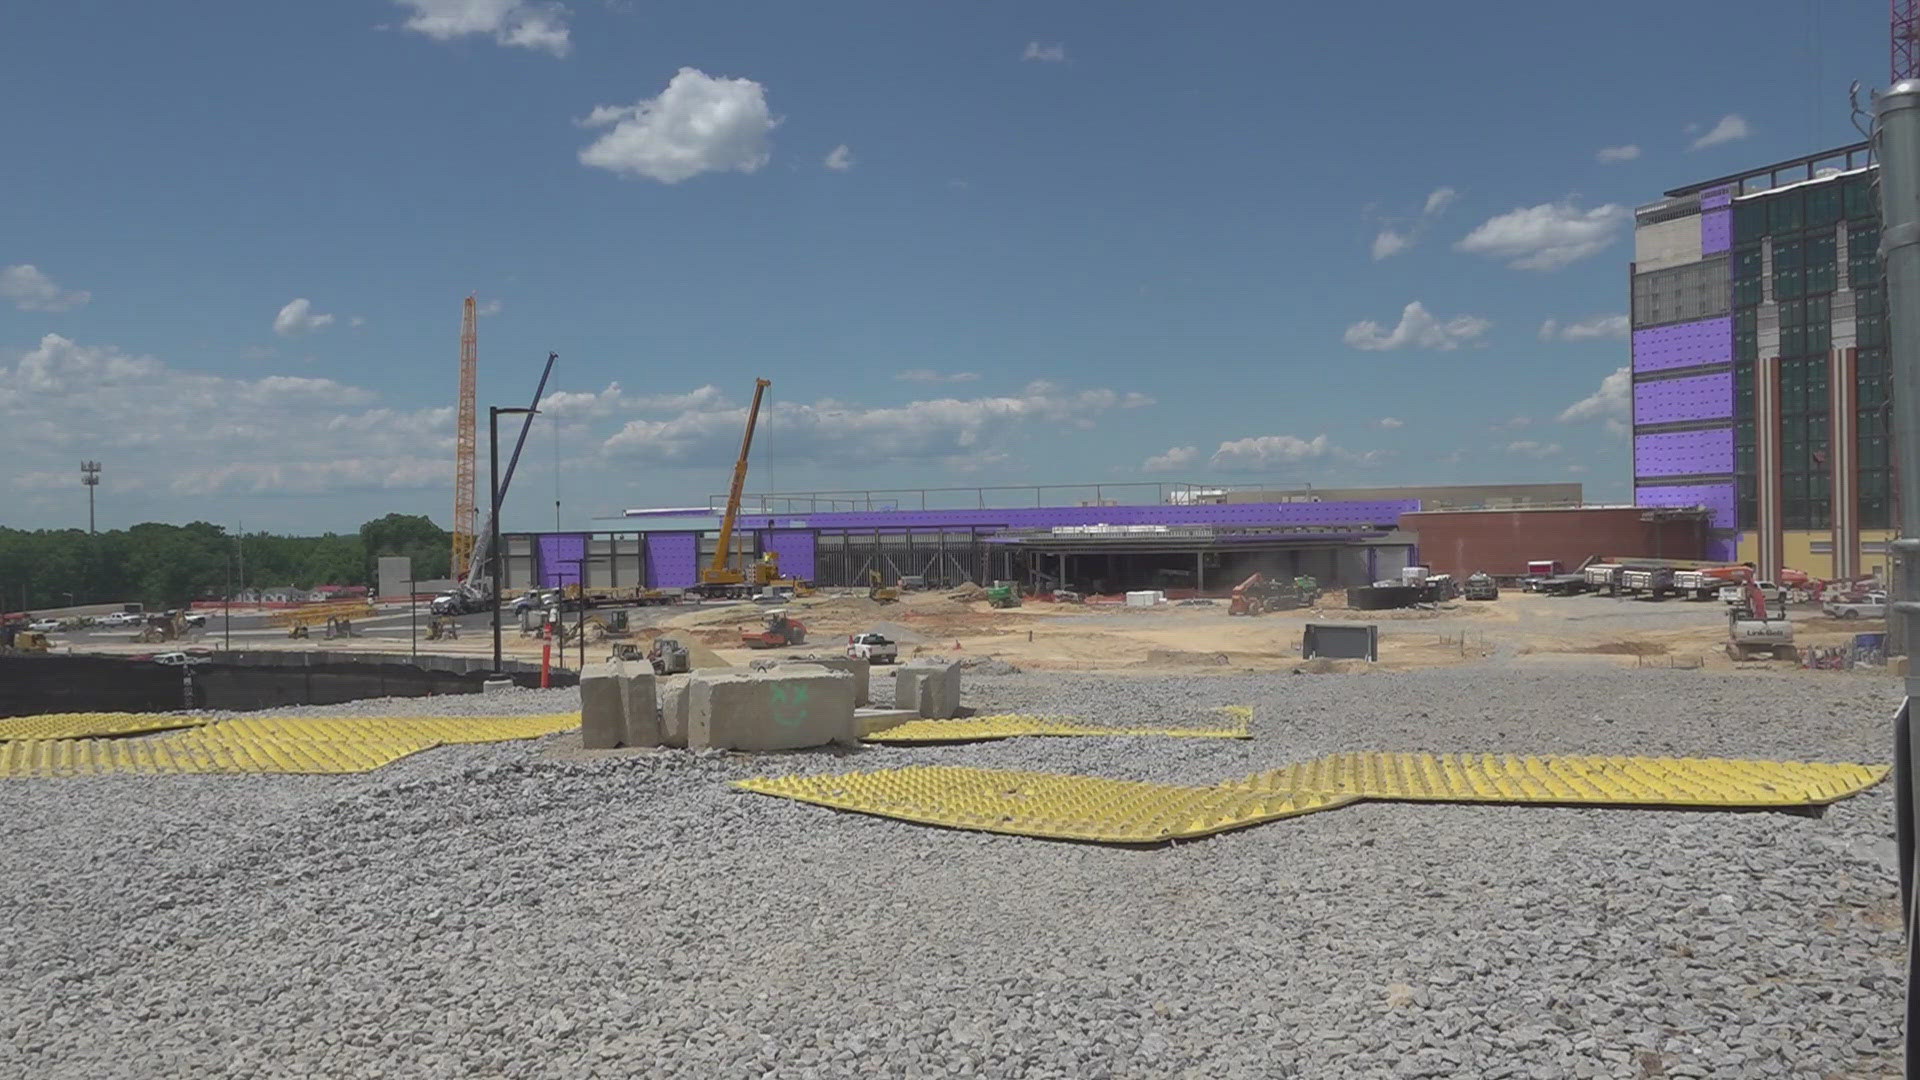 Danville leaders said the temporary casino has made a big difference, ahead of the Caesar’s Virginia casino resort opening.